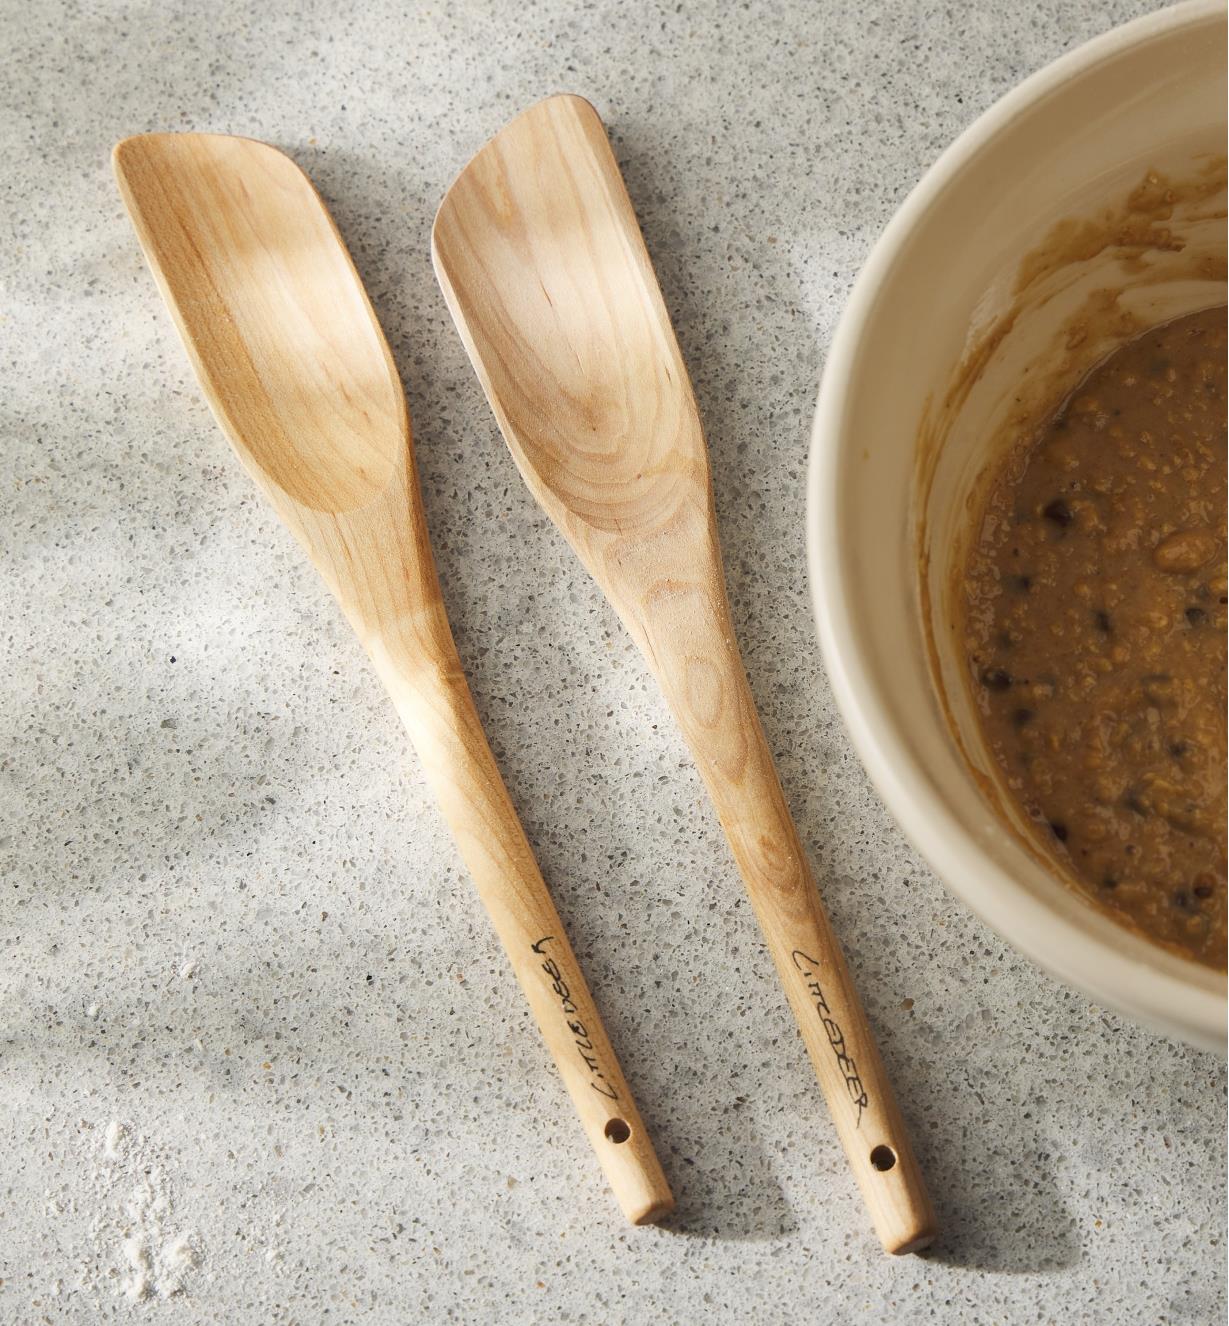 Two slanted pot scoops next to a mixing bowl